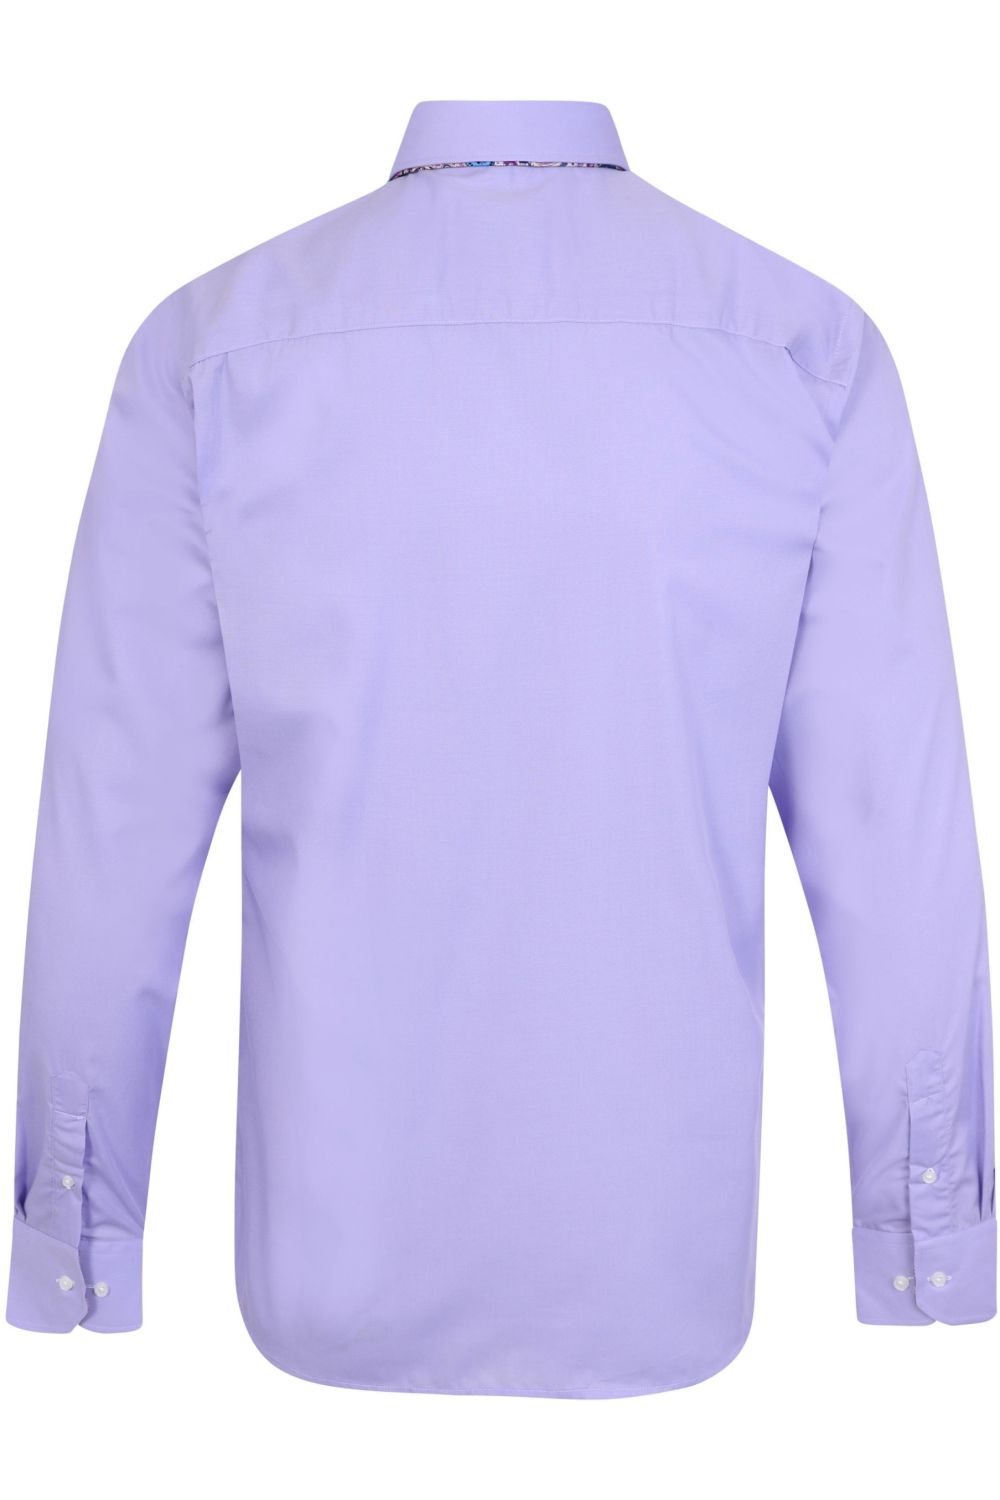 Plain Lilac Regular Fit 100% Cotton Shirt with Paisley Double Collar